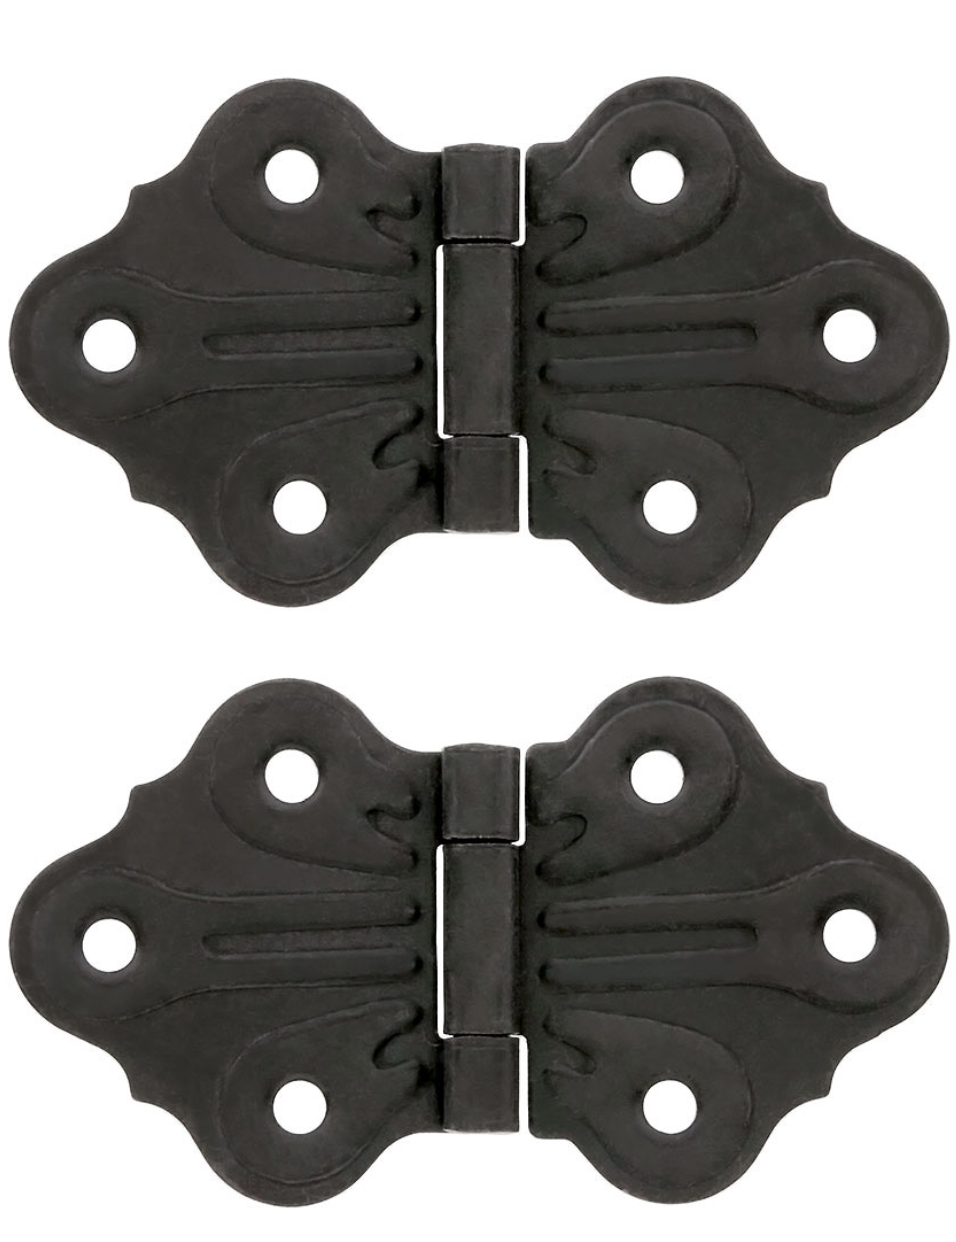 Pair of Butterfly Flush Mount Cabinet Hinges